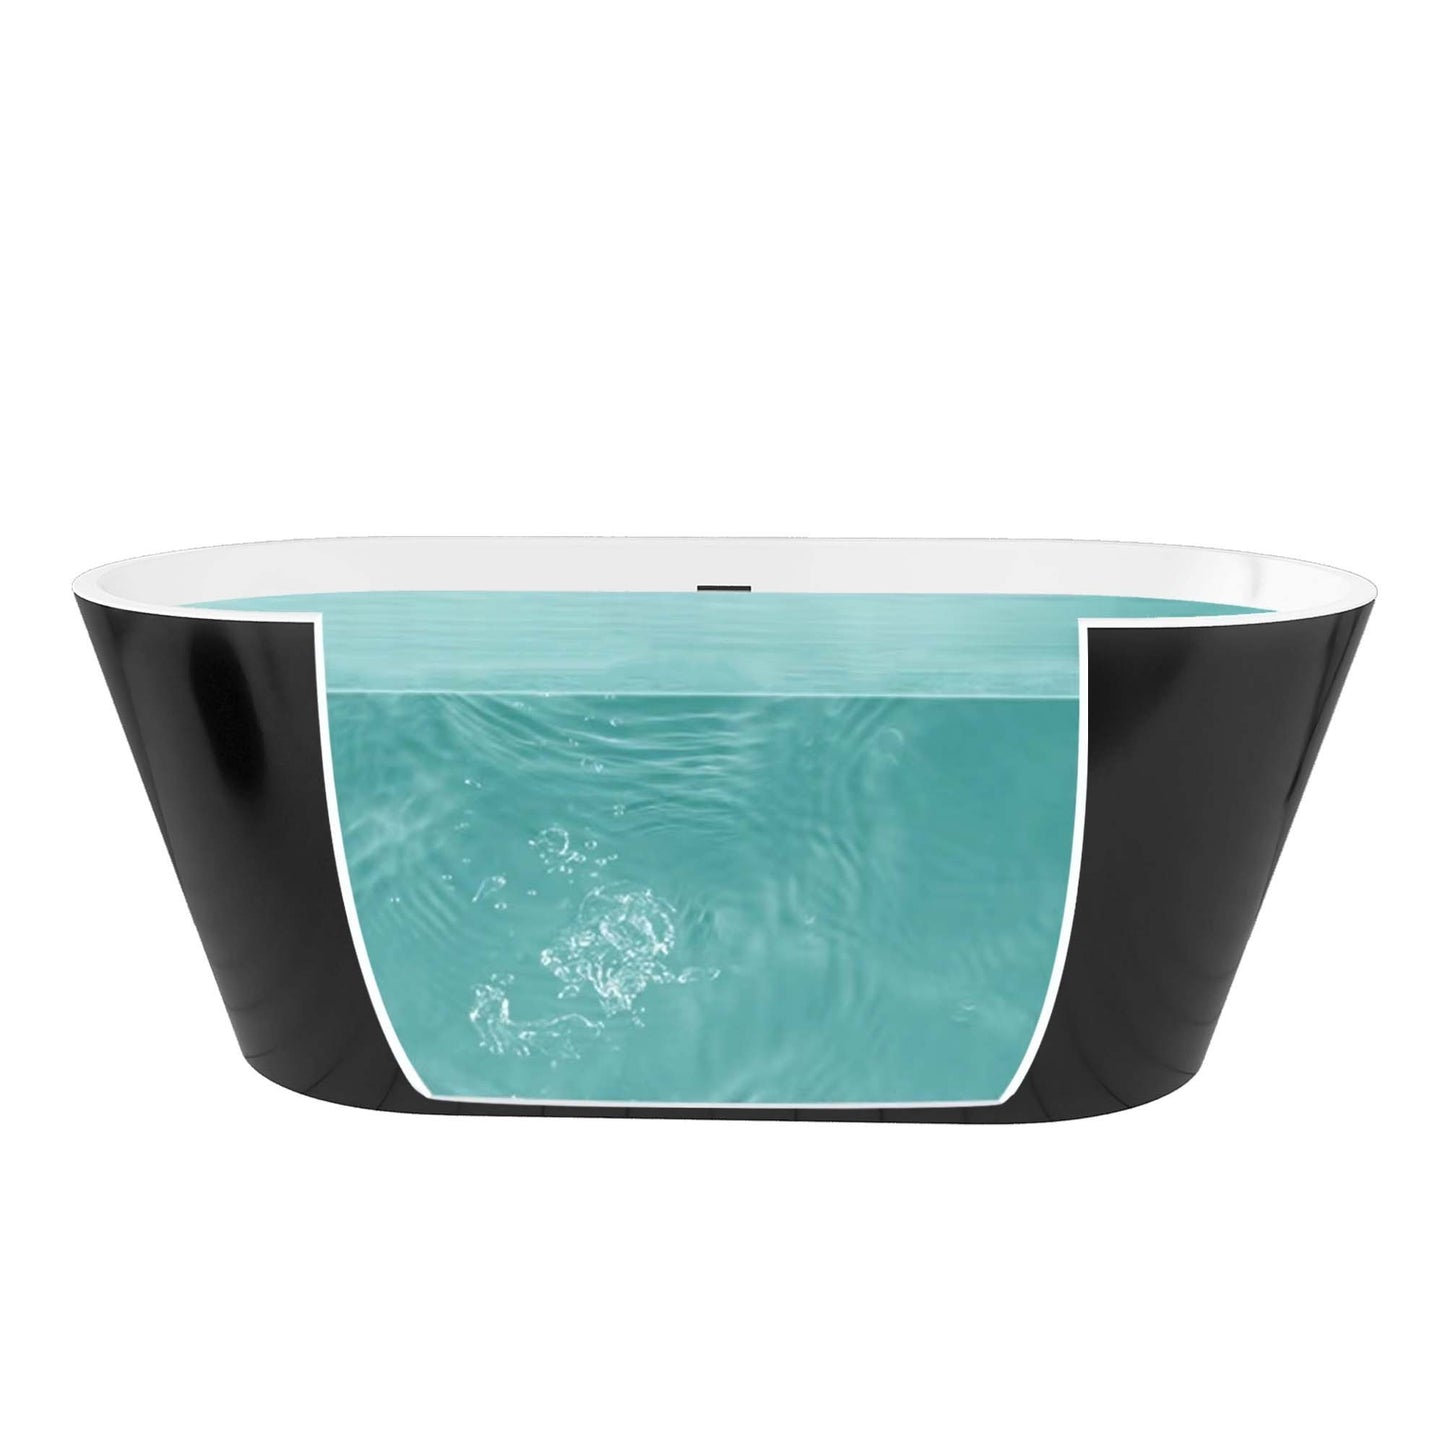 55" Acrylic Free Standing Tub - Classic Oval Shape Soaking Tub, Adjustable Freestanding Bathtub with Integrated Slotted Overflow and Chrome Pop-up Drain Anti-clogging Gloss Black